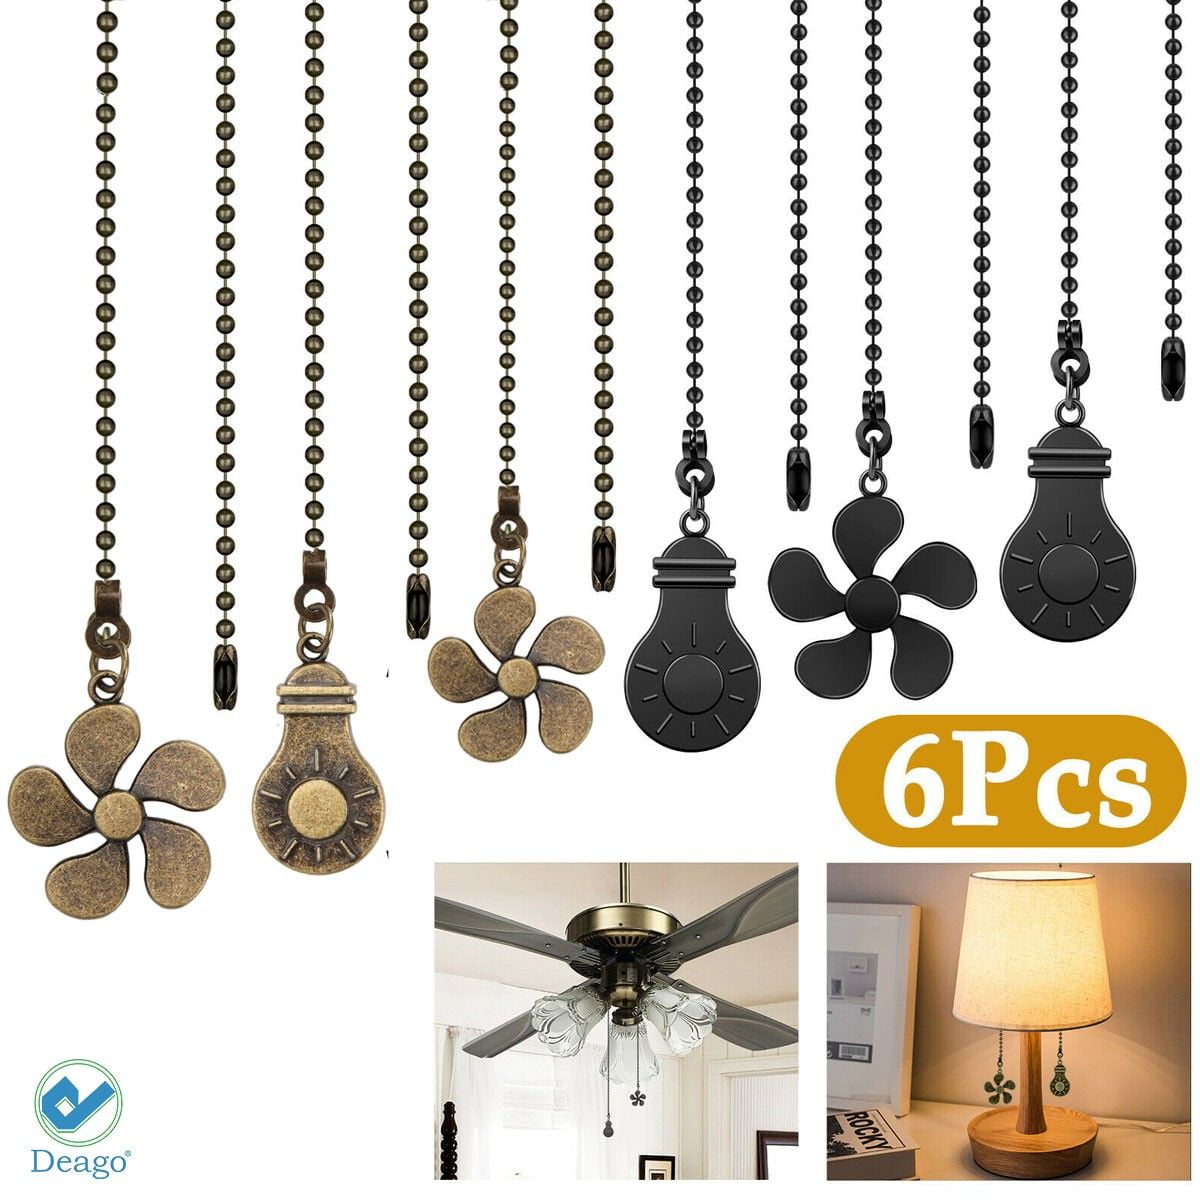 US_4 Ceiling Fan Chain Pulls Beaded Ball Wood Pendant Light Chain Extension 30cm 